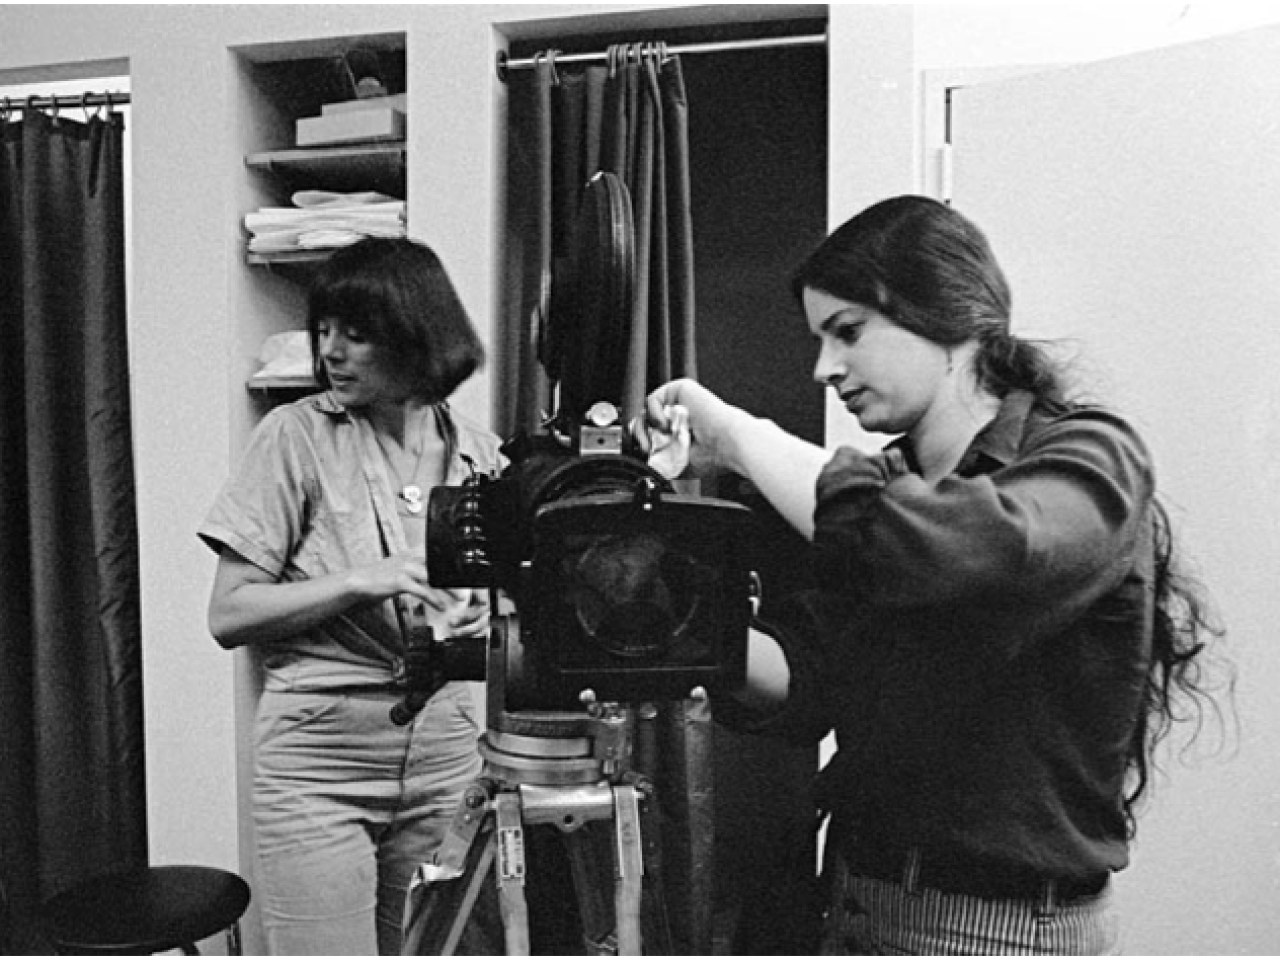 Black and white photo of Amalie Rothschild working on her video camera on an all-women set in the 1970s.